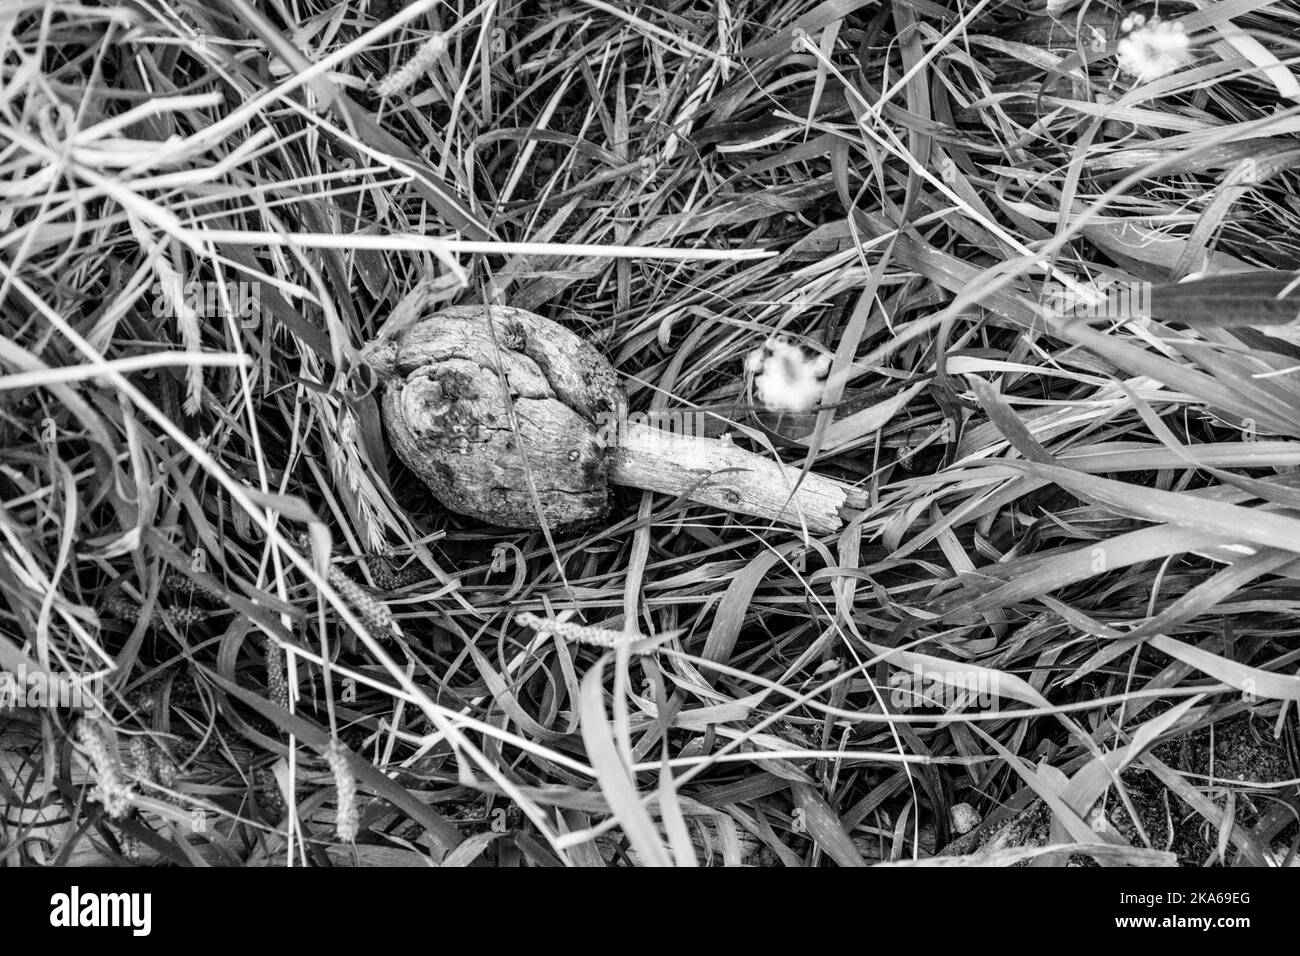 Peace of wood shaped like a mushroom lying on the grass in black and white. Stock Photo